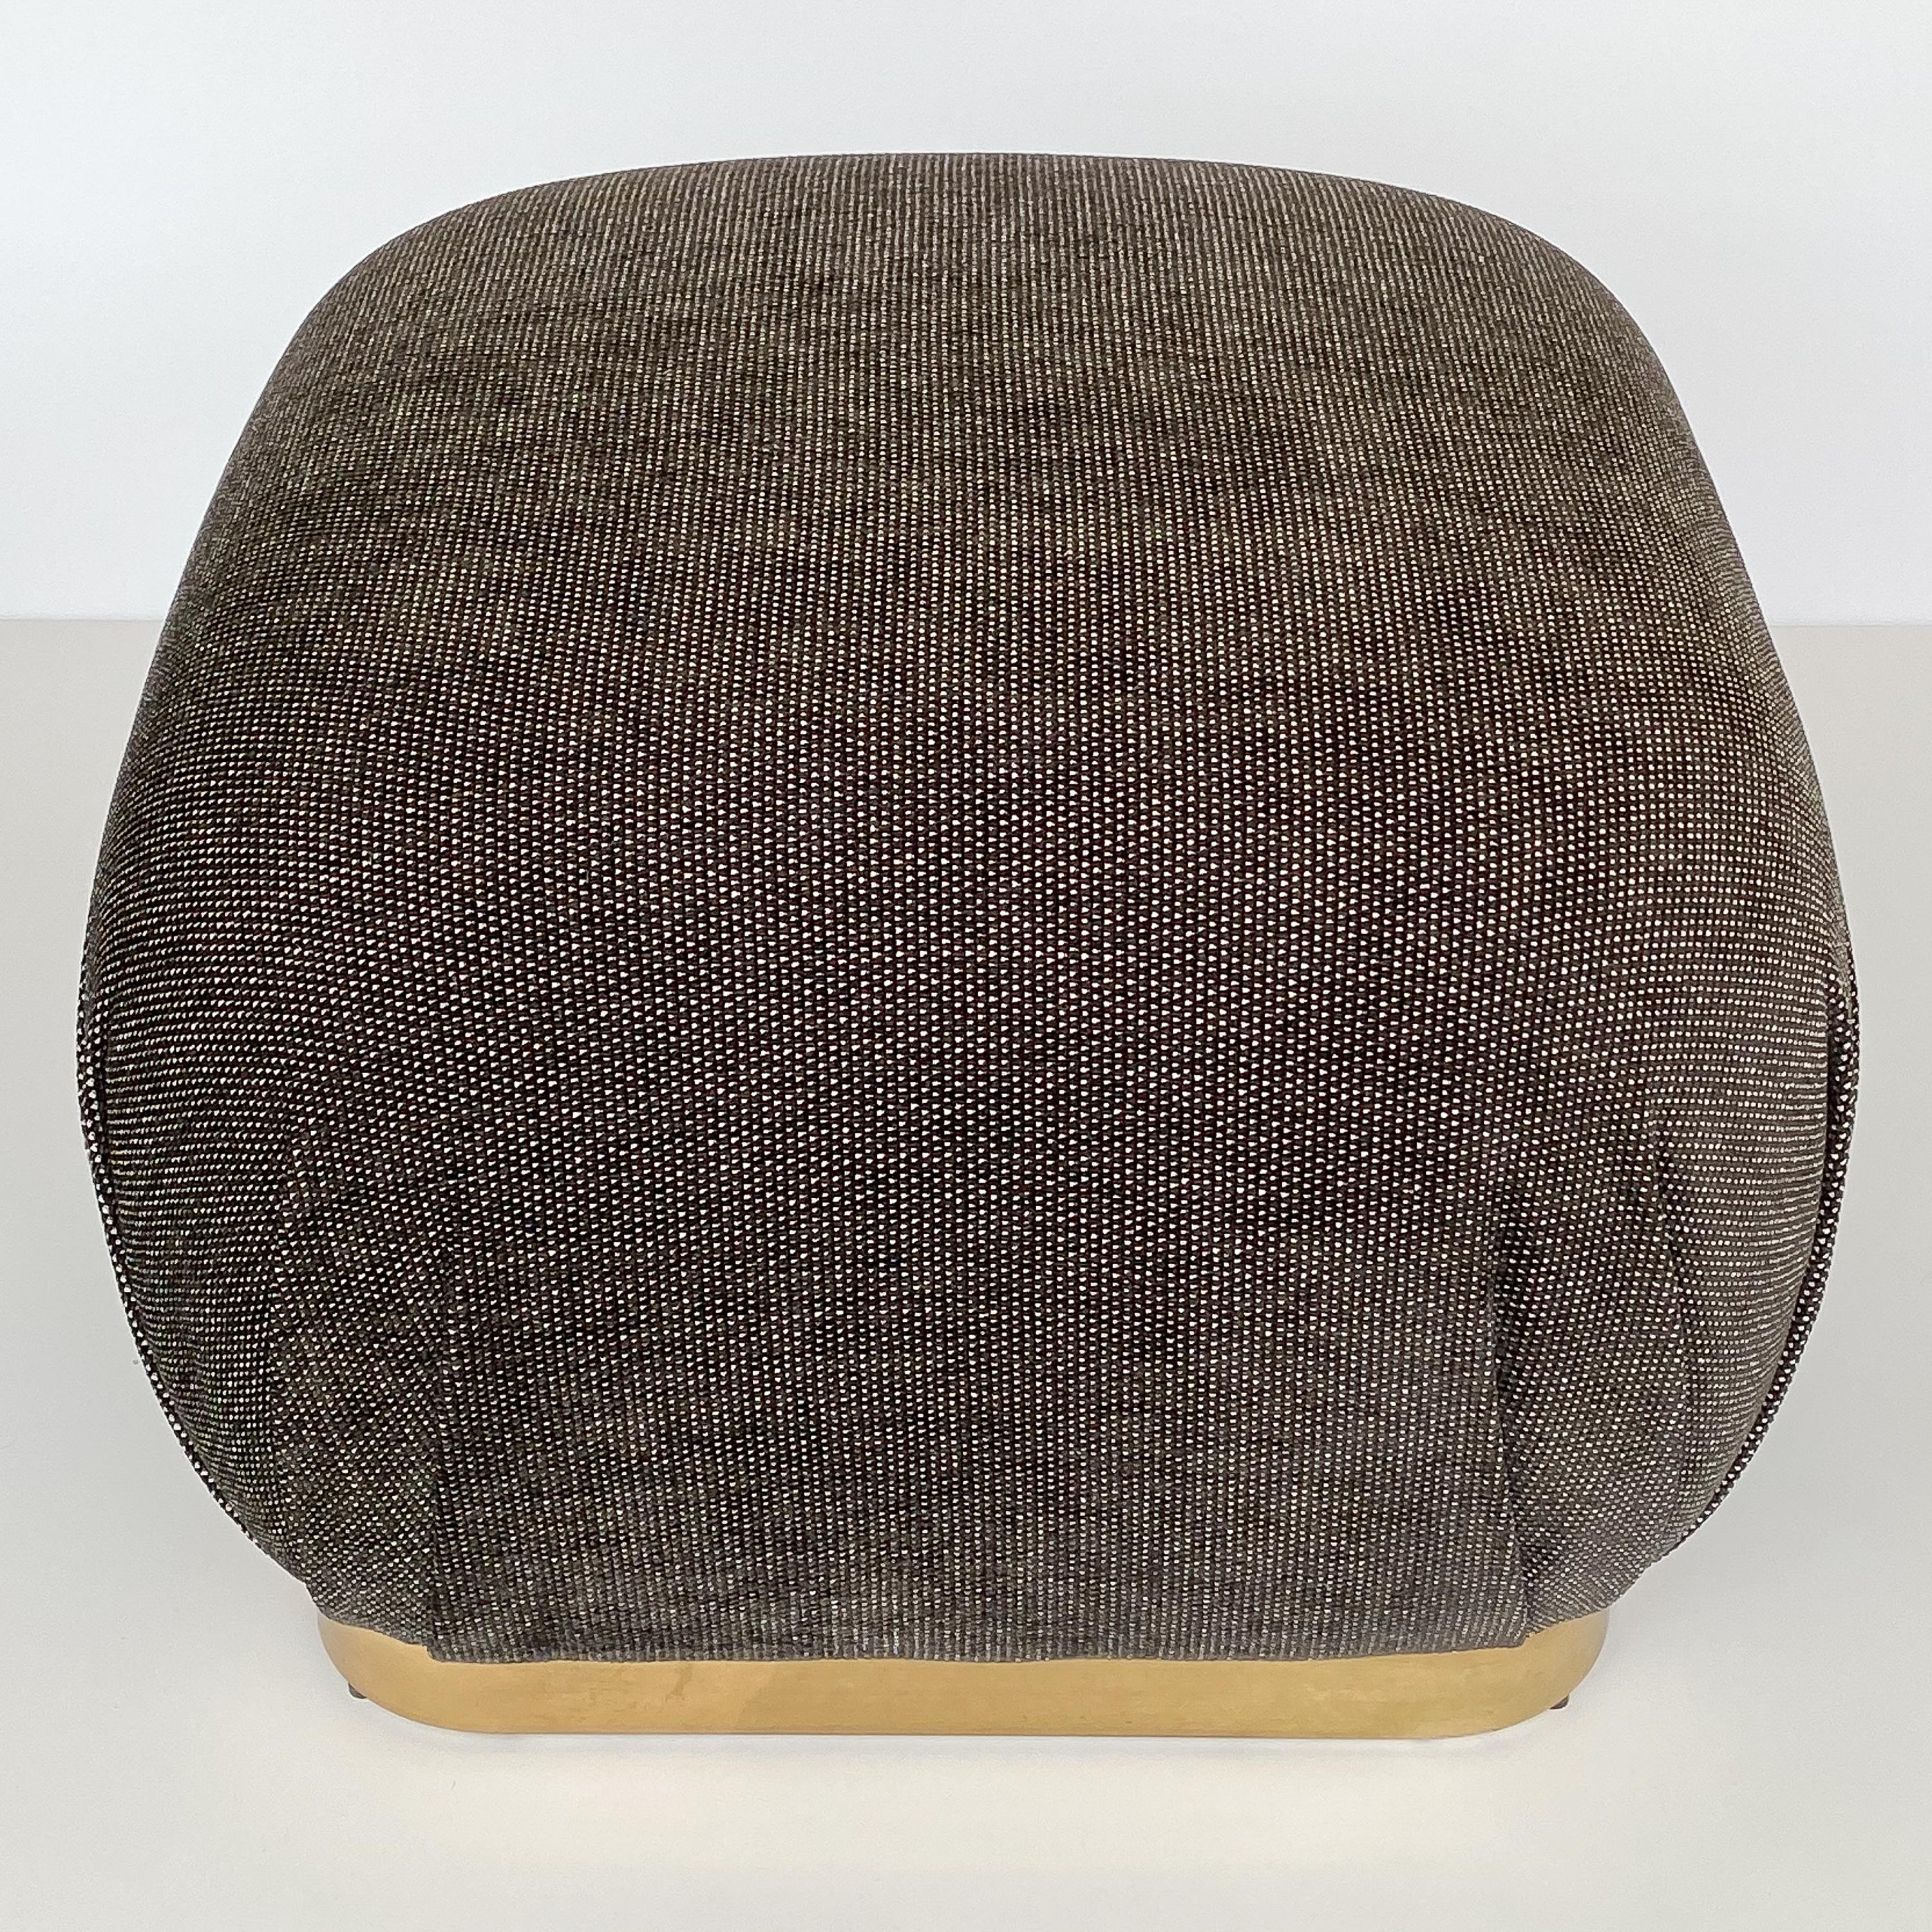 A Karl Springer style bronze tone soufflé pouf ottoman, circa 1970s. This ottoman has been newly upholstered in a viscose blend chenille fabric in a warm gunmetal gray and white dot. New foam throughout. 2